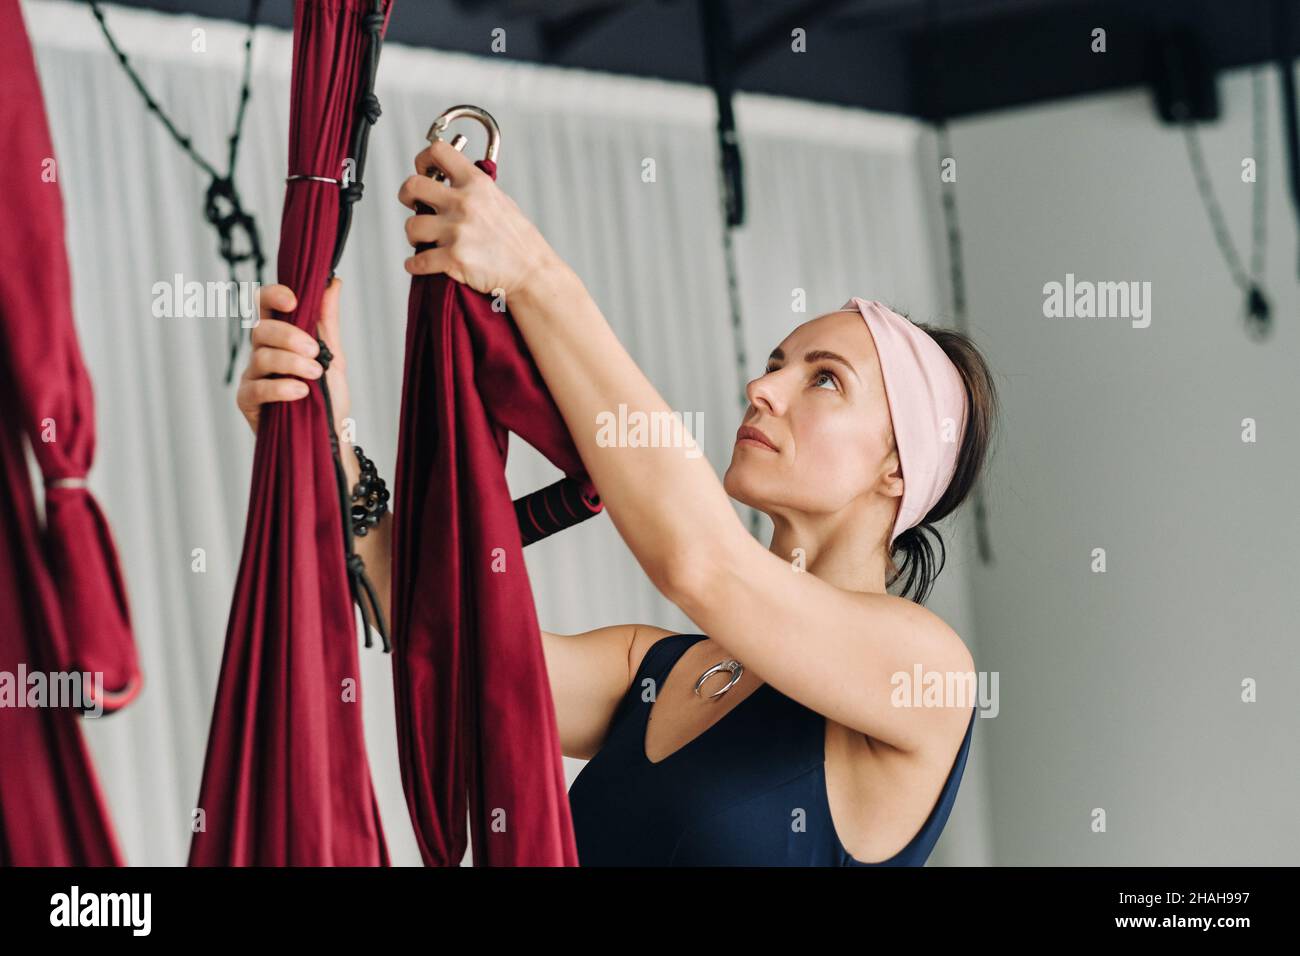 A woman fastens a hook from a hanging hammock for yoga in the gym. Stock Photo